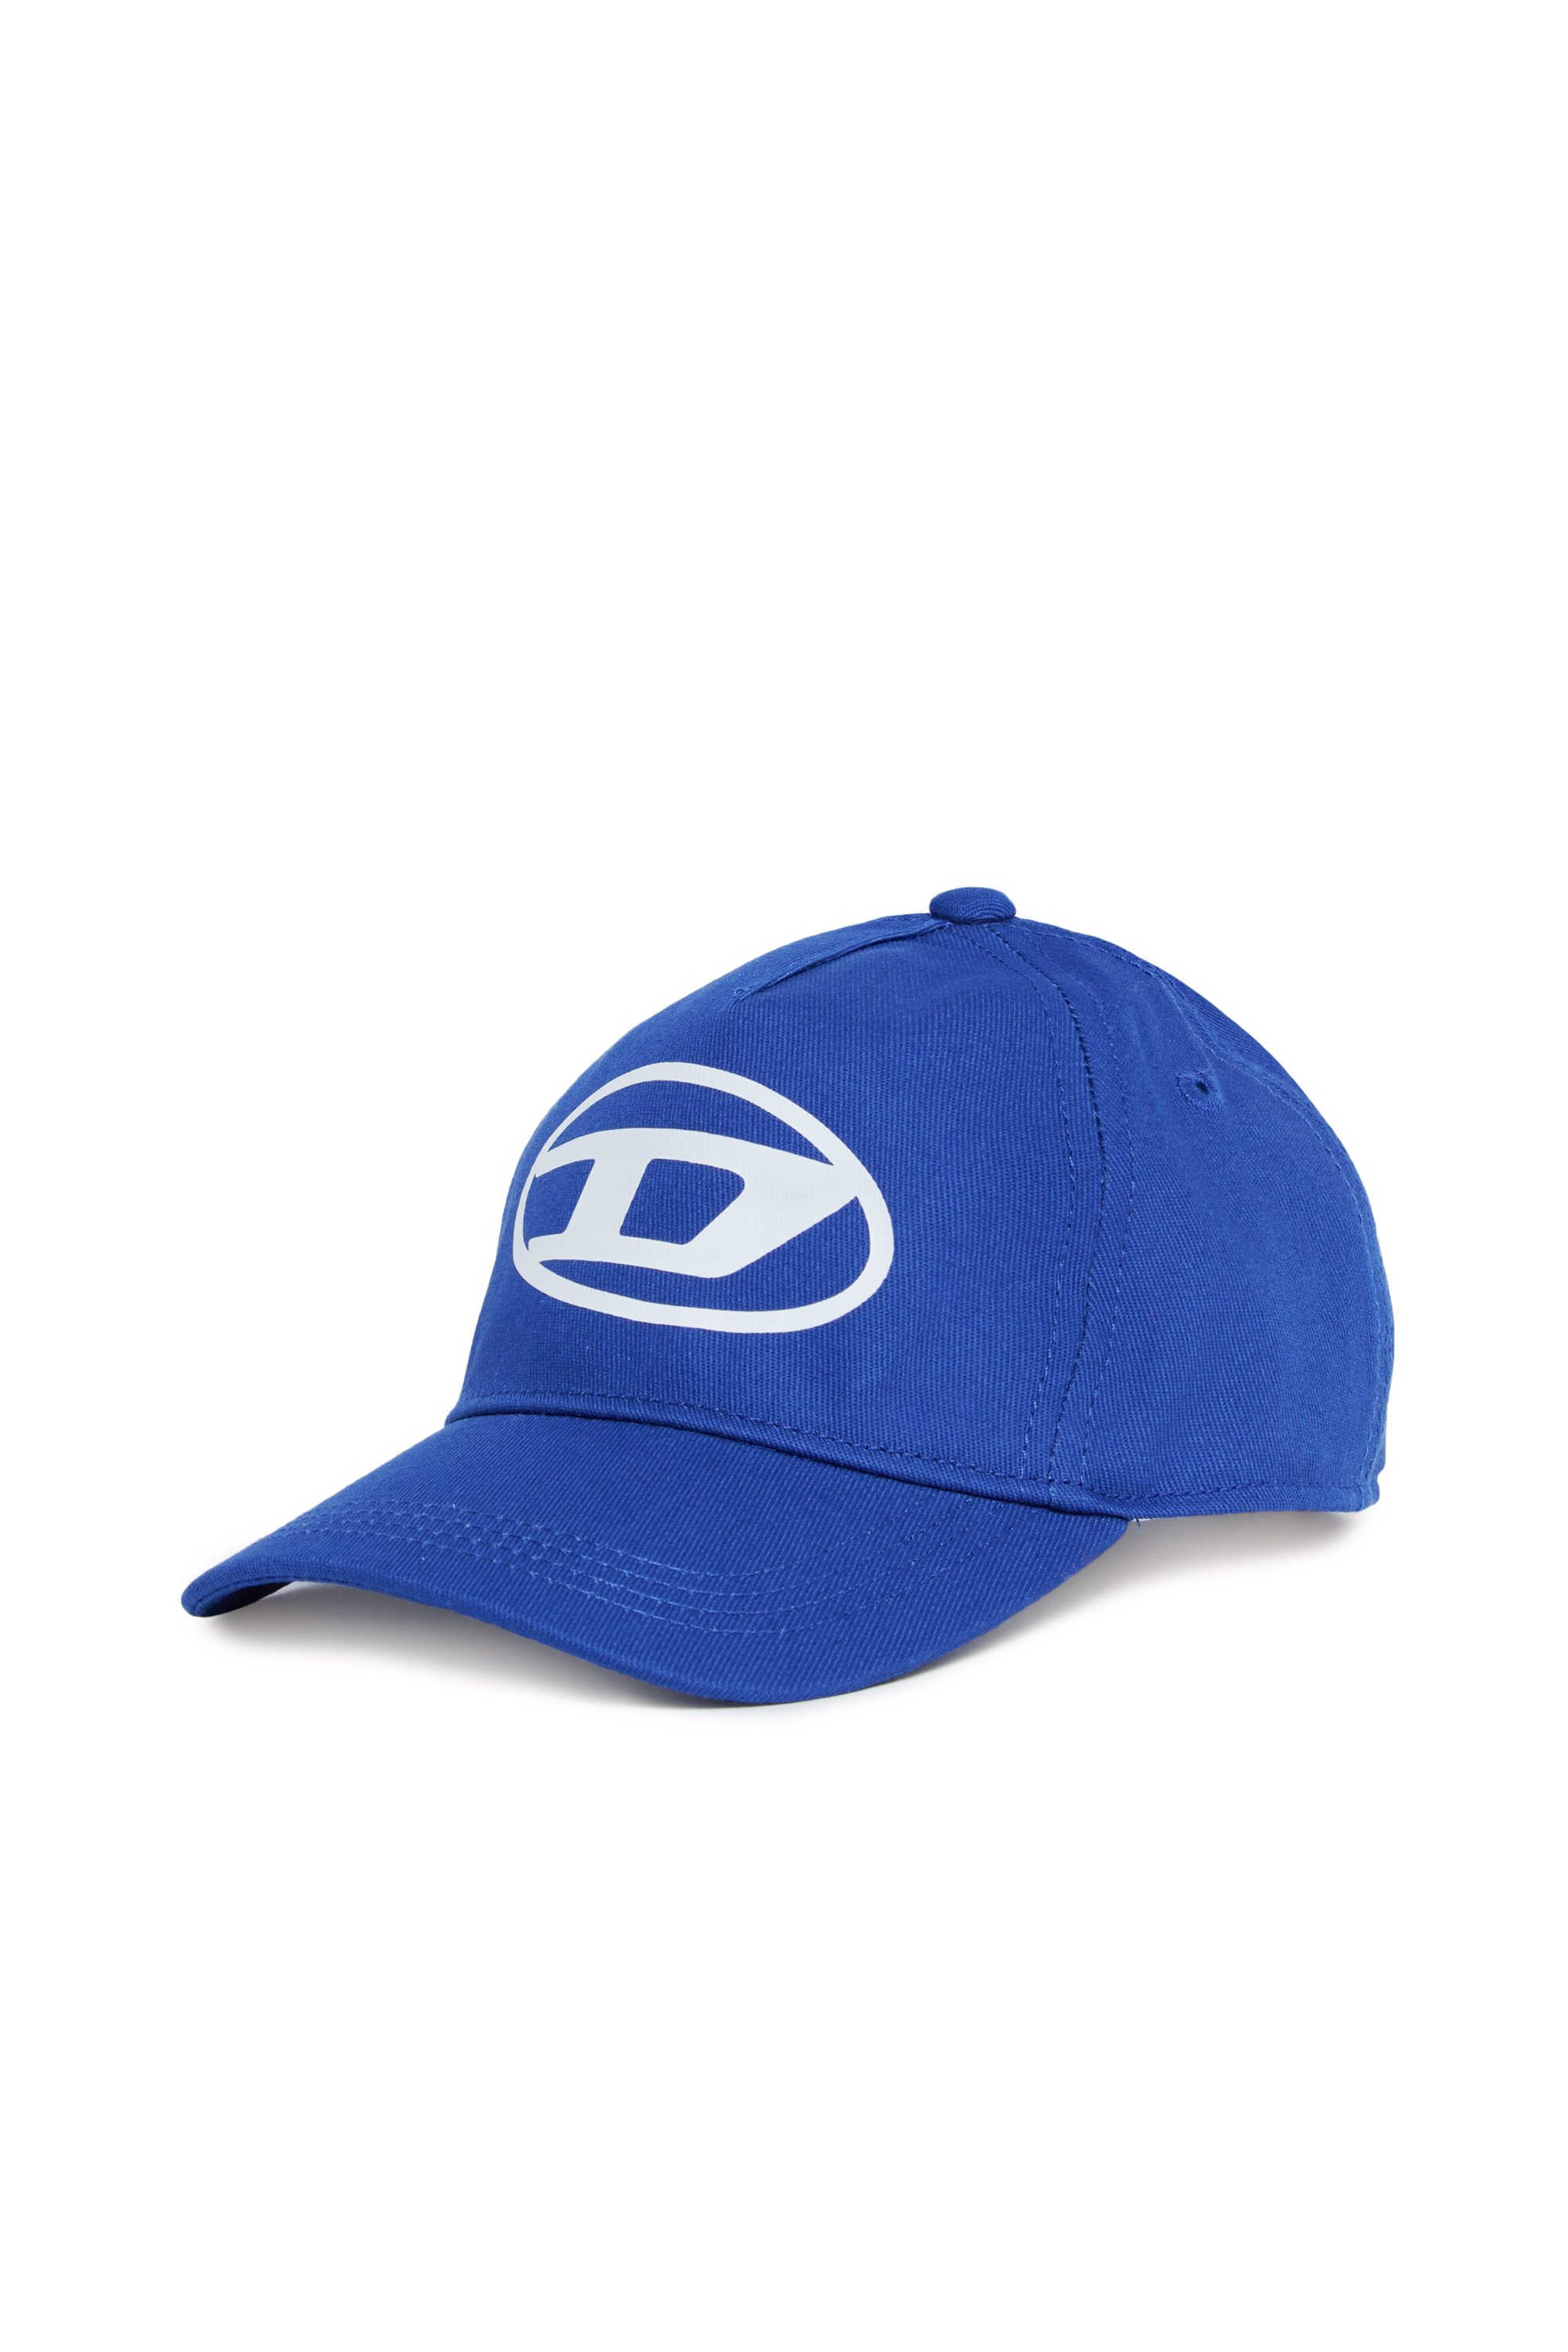 Diesel - FIMBOB, Unisex Baseball cap with Oval D print in Blue - Image 1